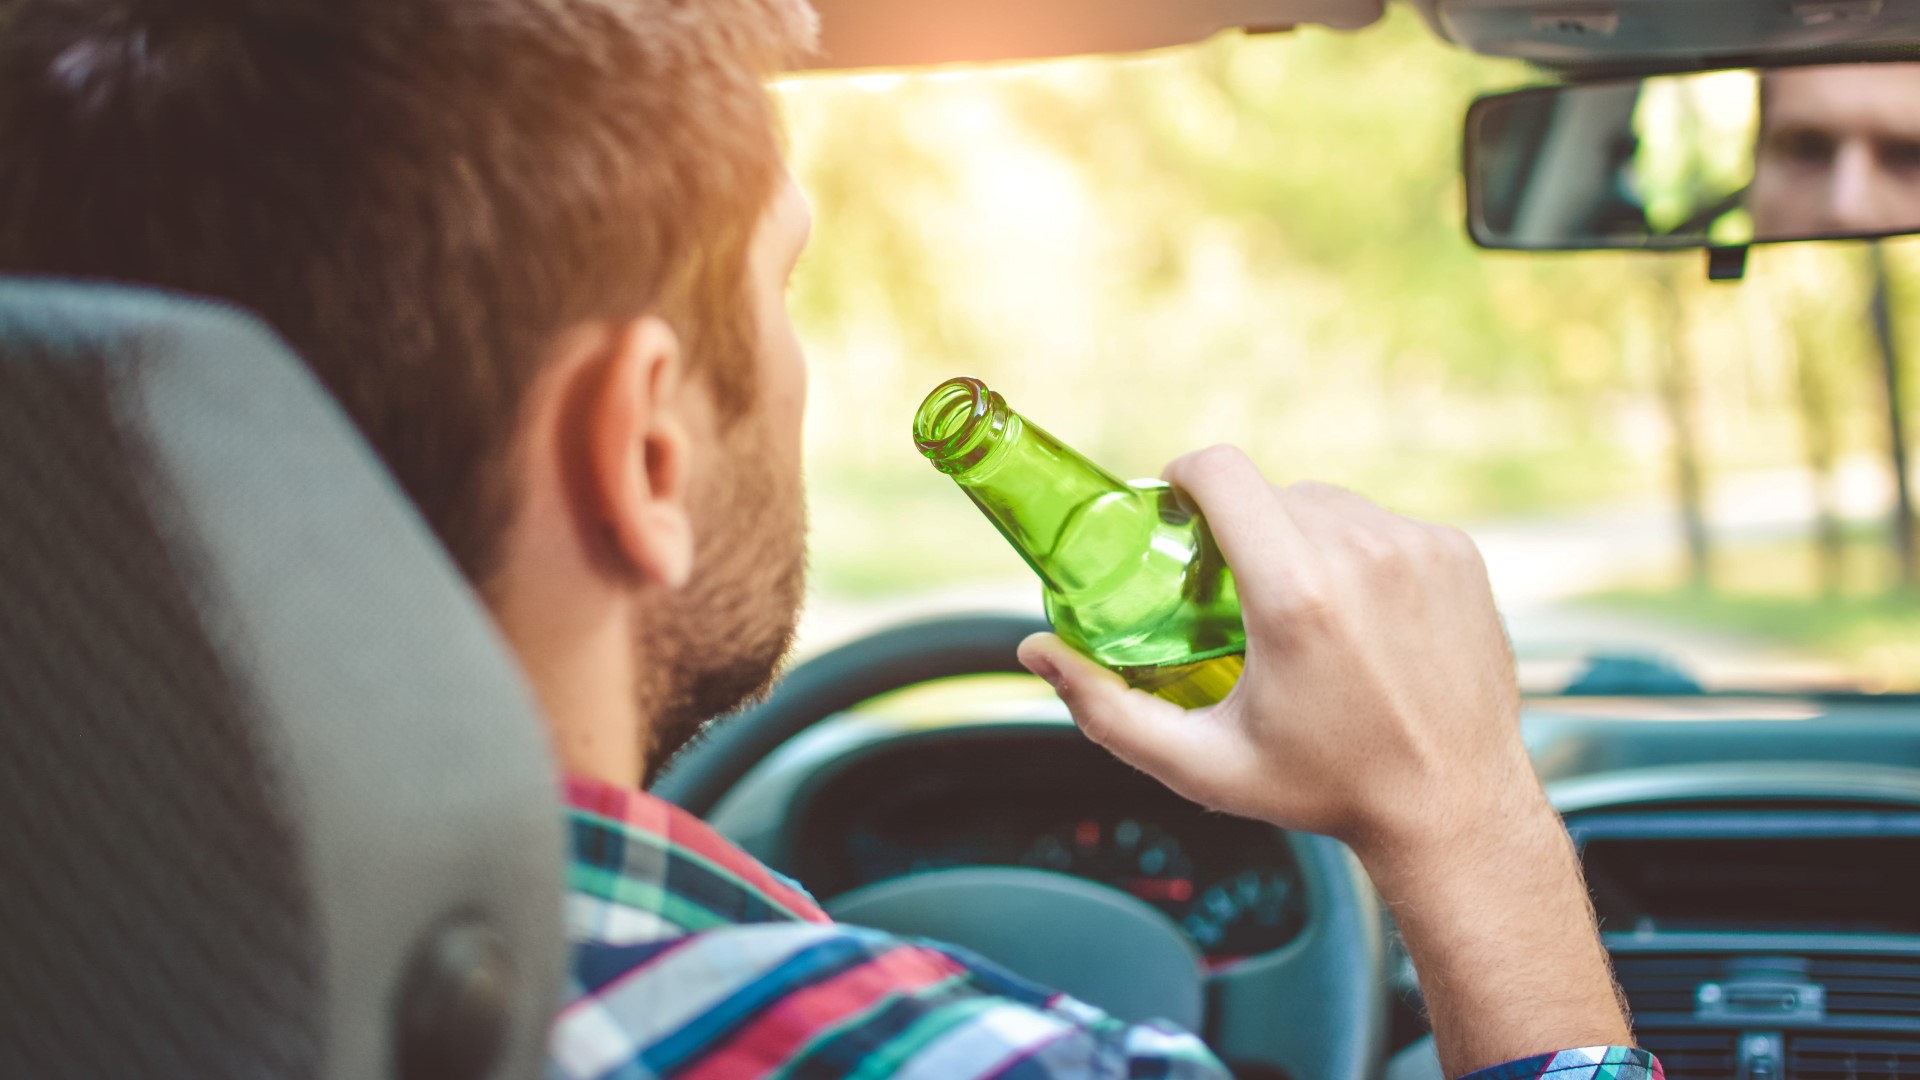 DUI vs DWI: What's The Difference?